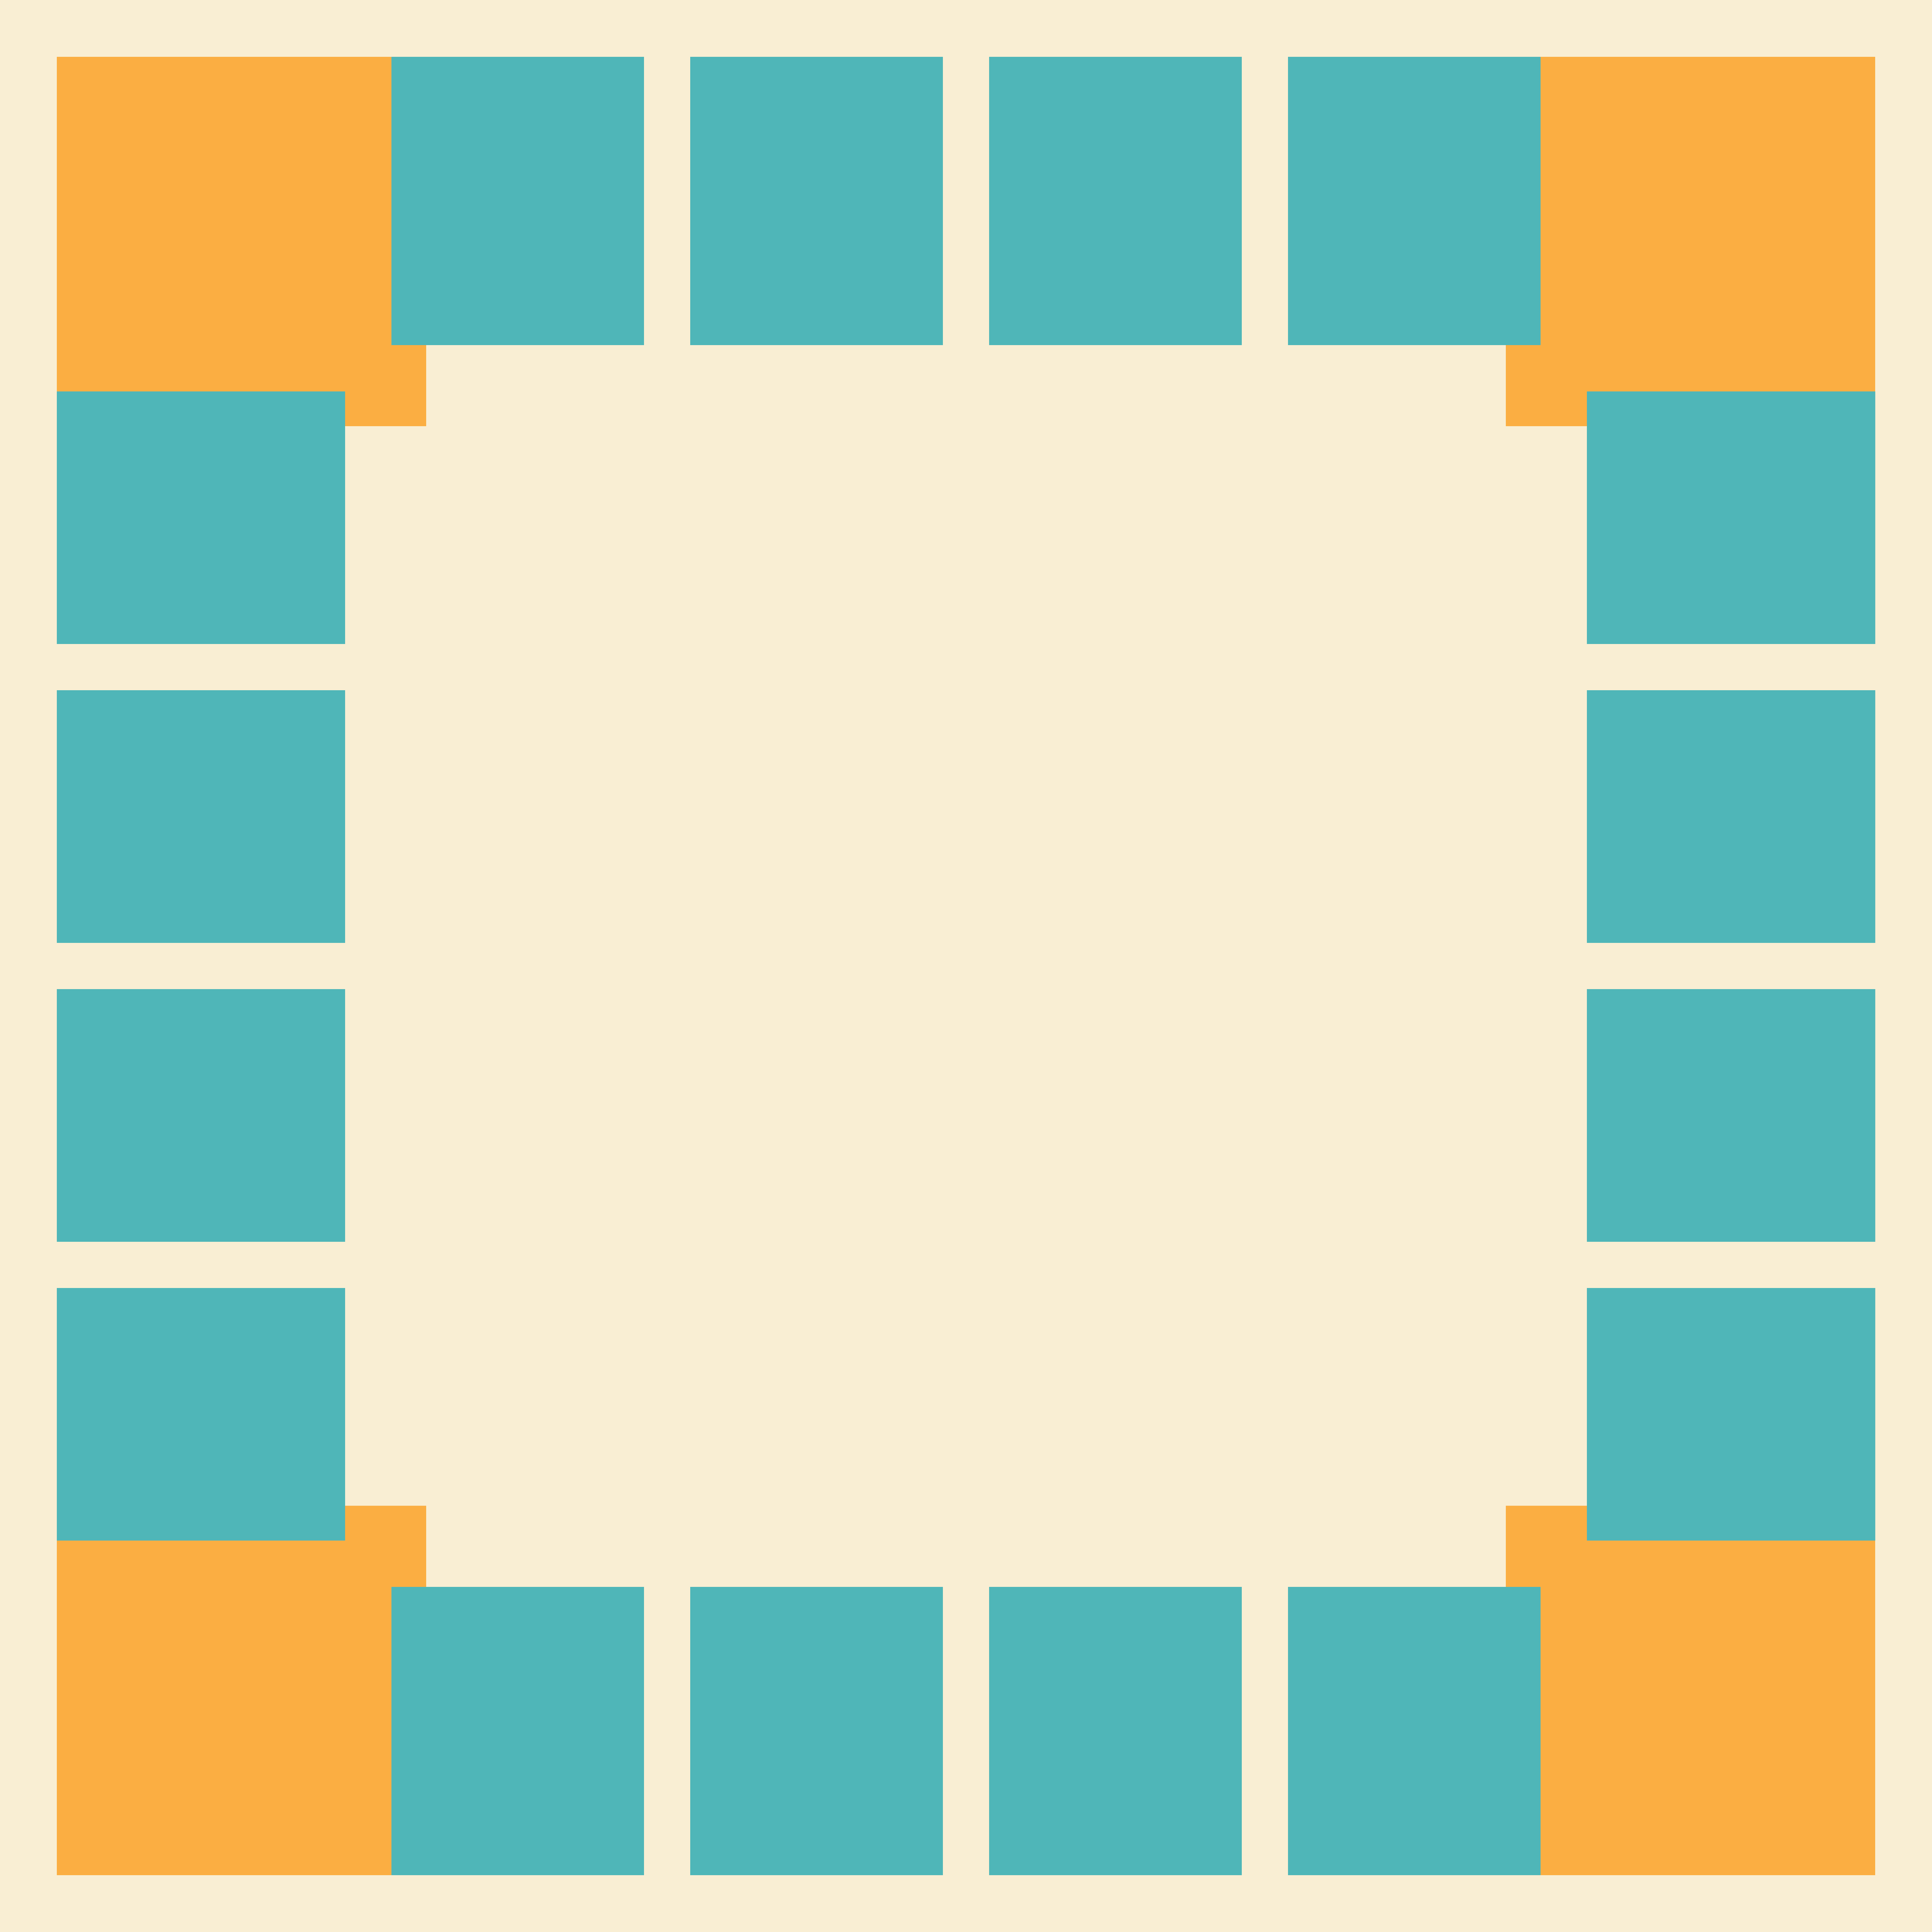 View full size version of empty squares on a graphic of a game board